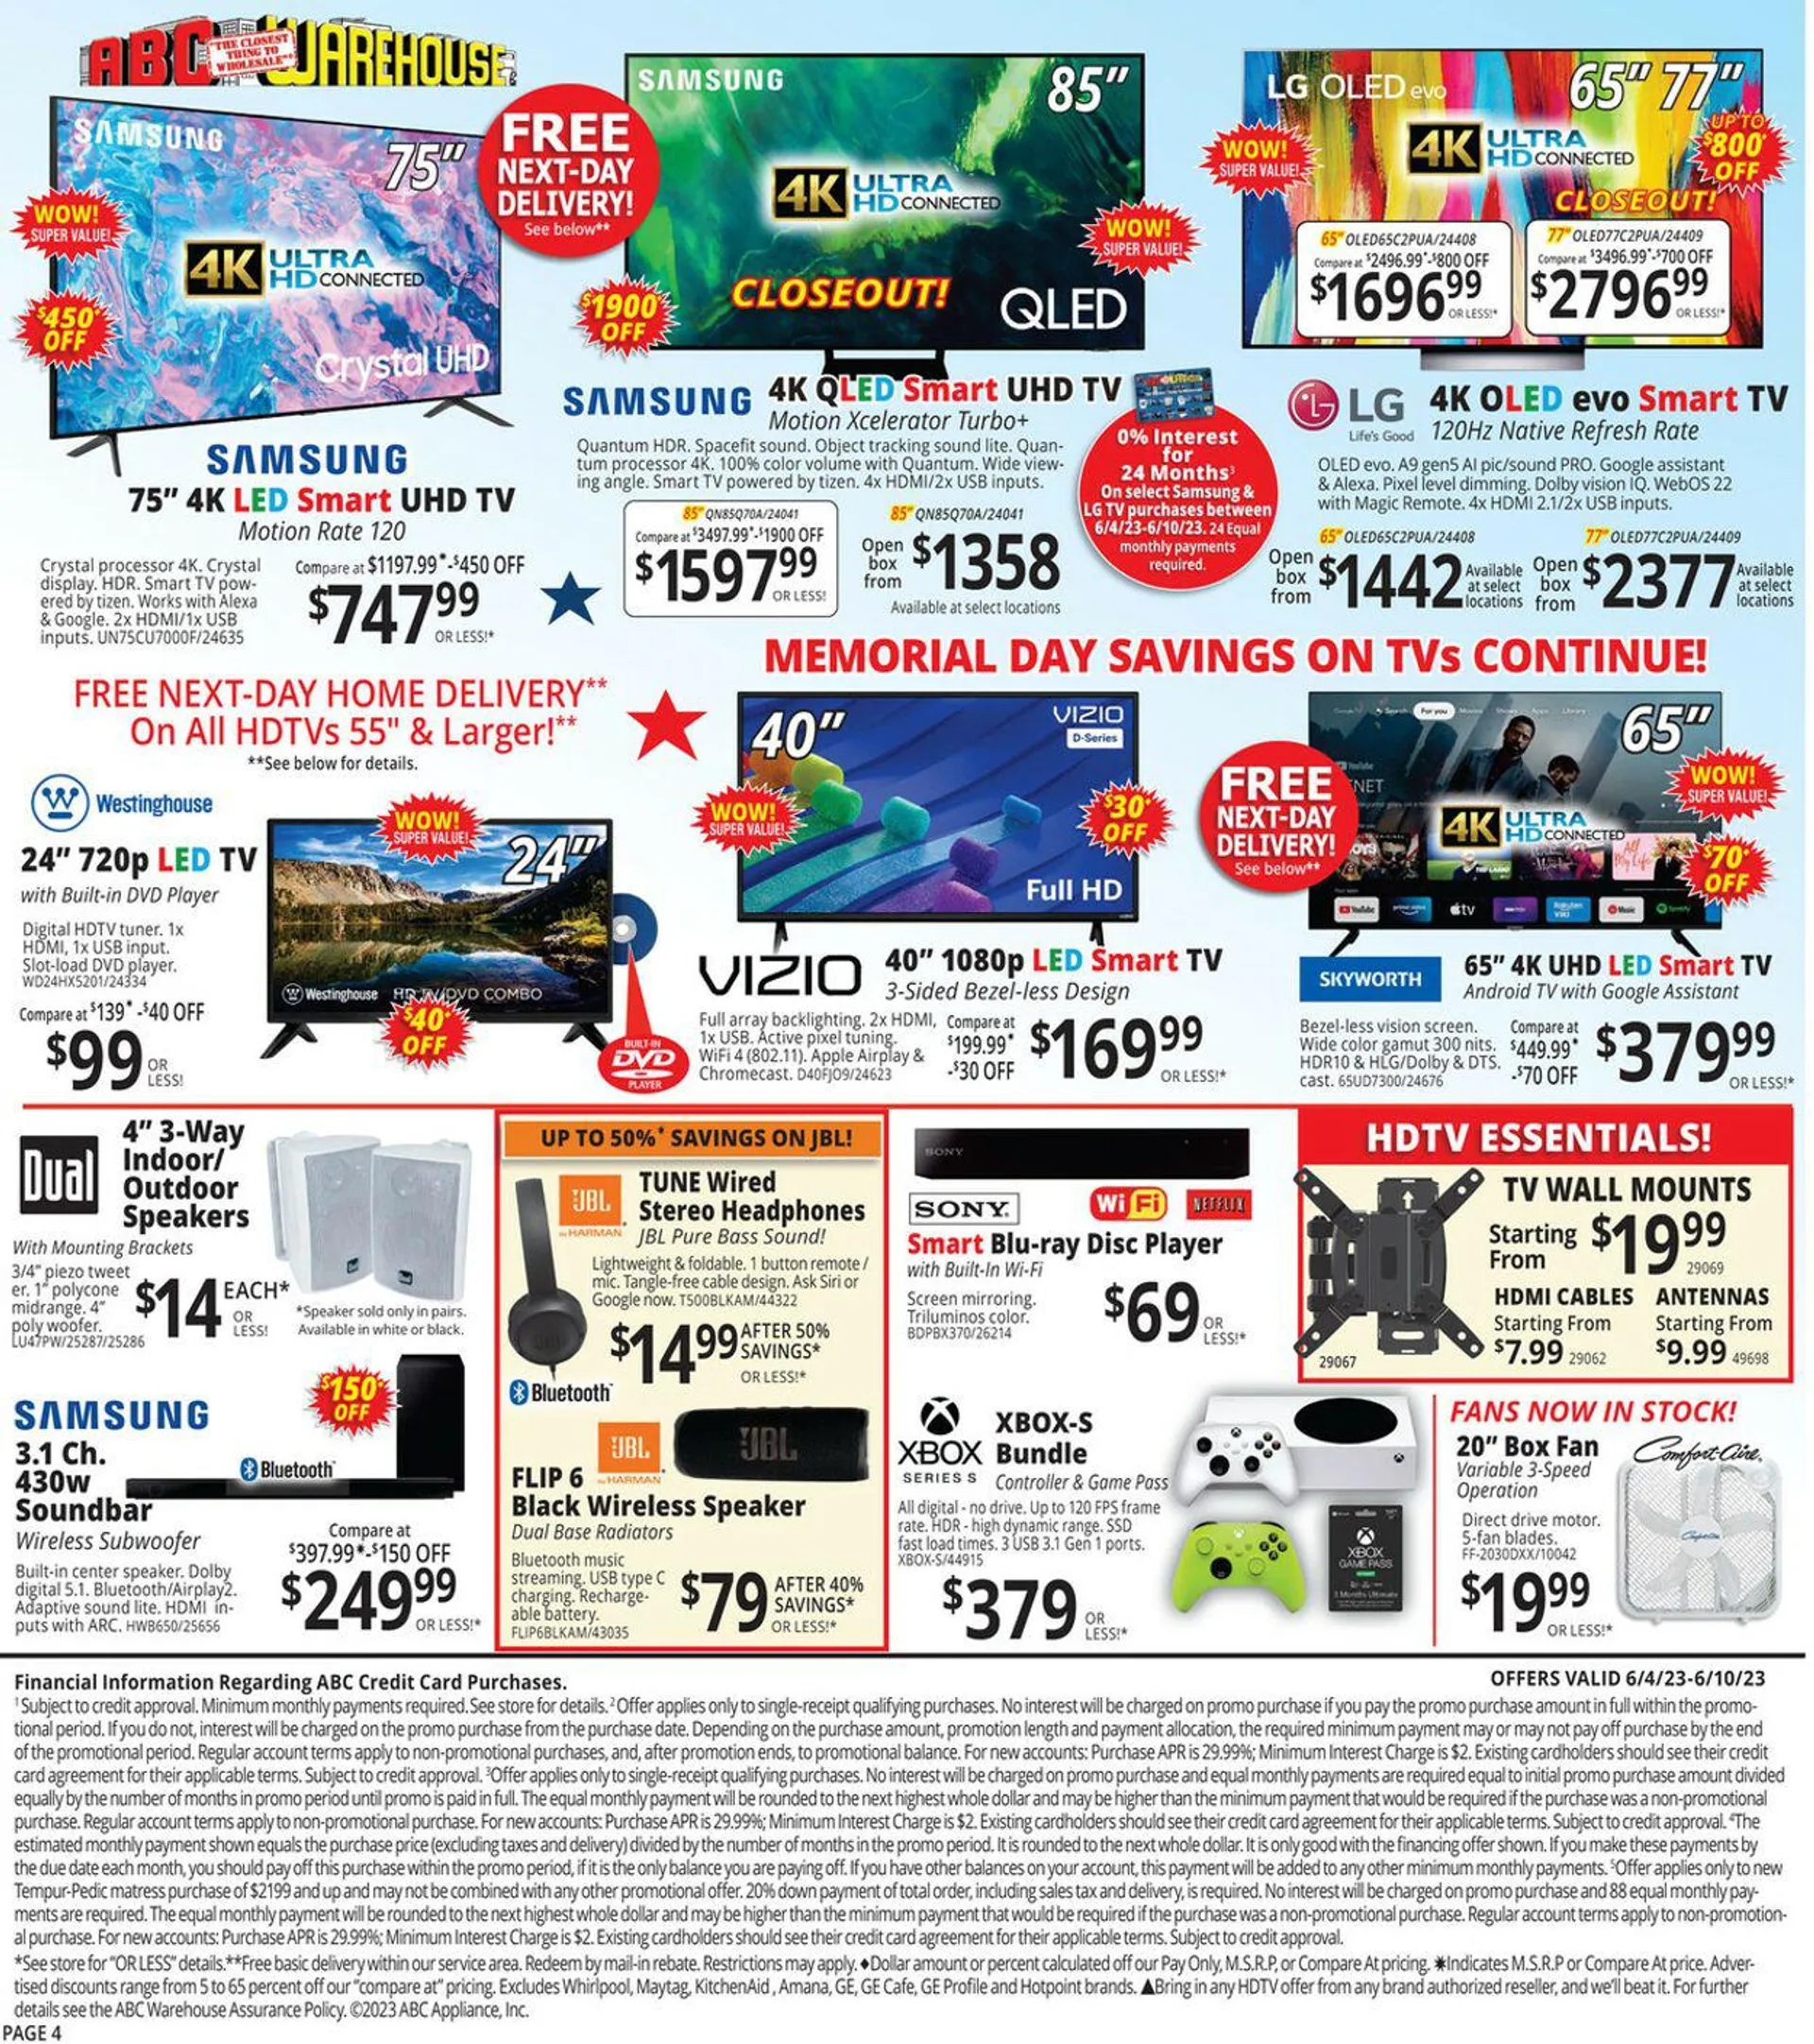 ABC Warehouse Current weekly ad - 4